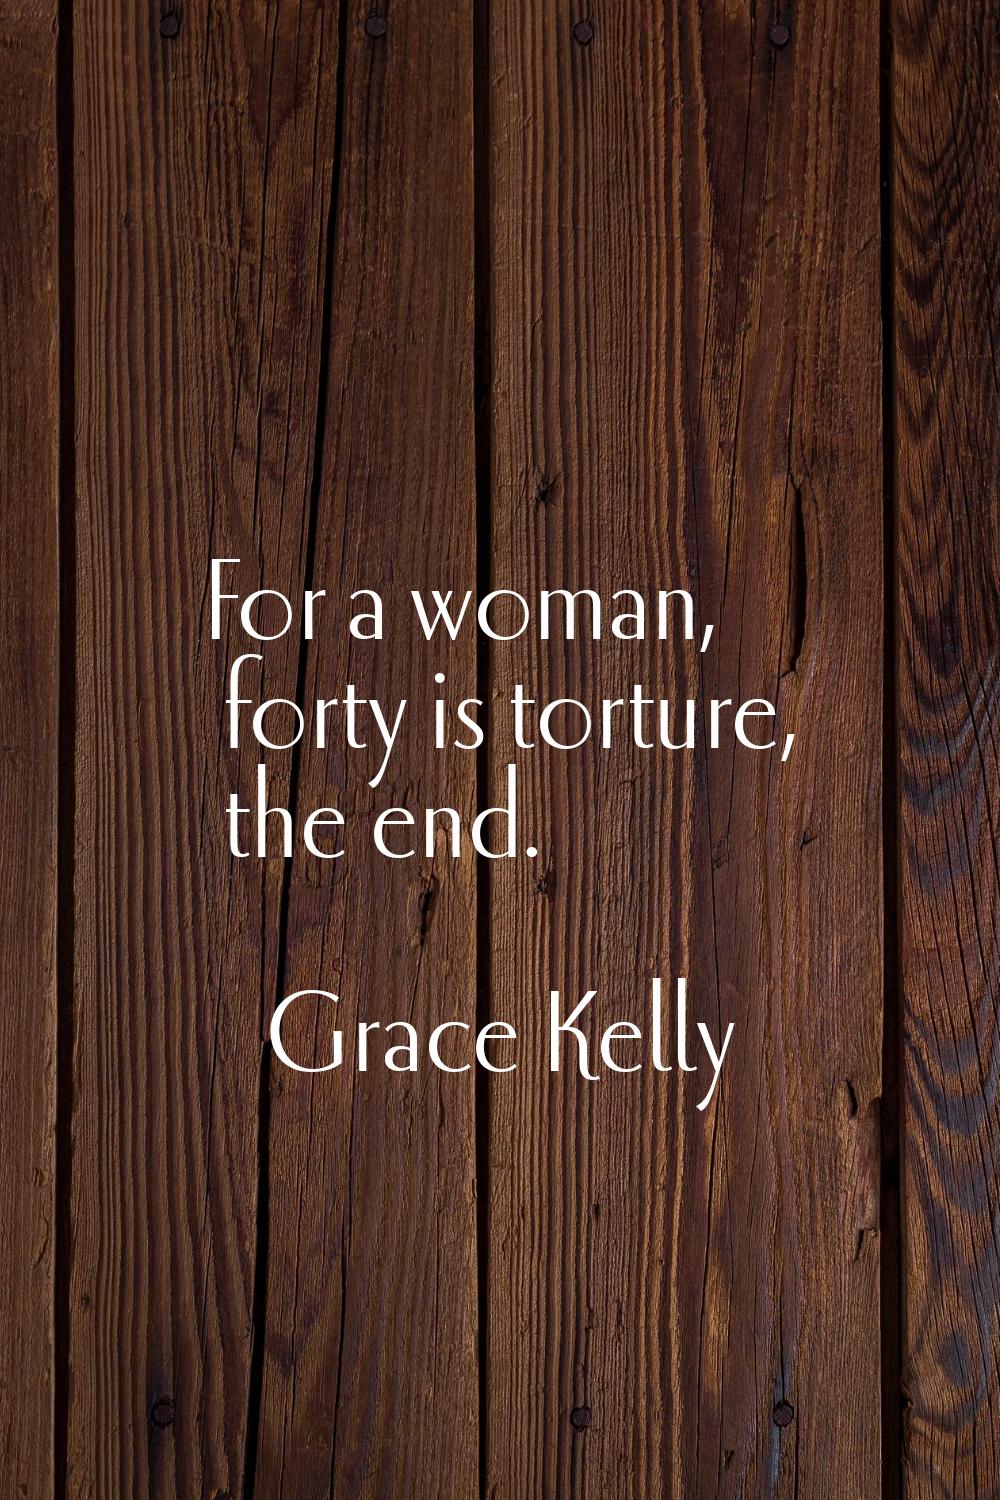 For a woman, forty is torture, the end.